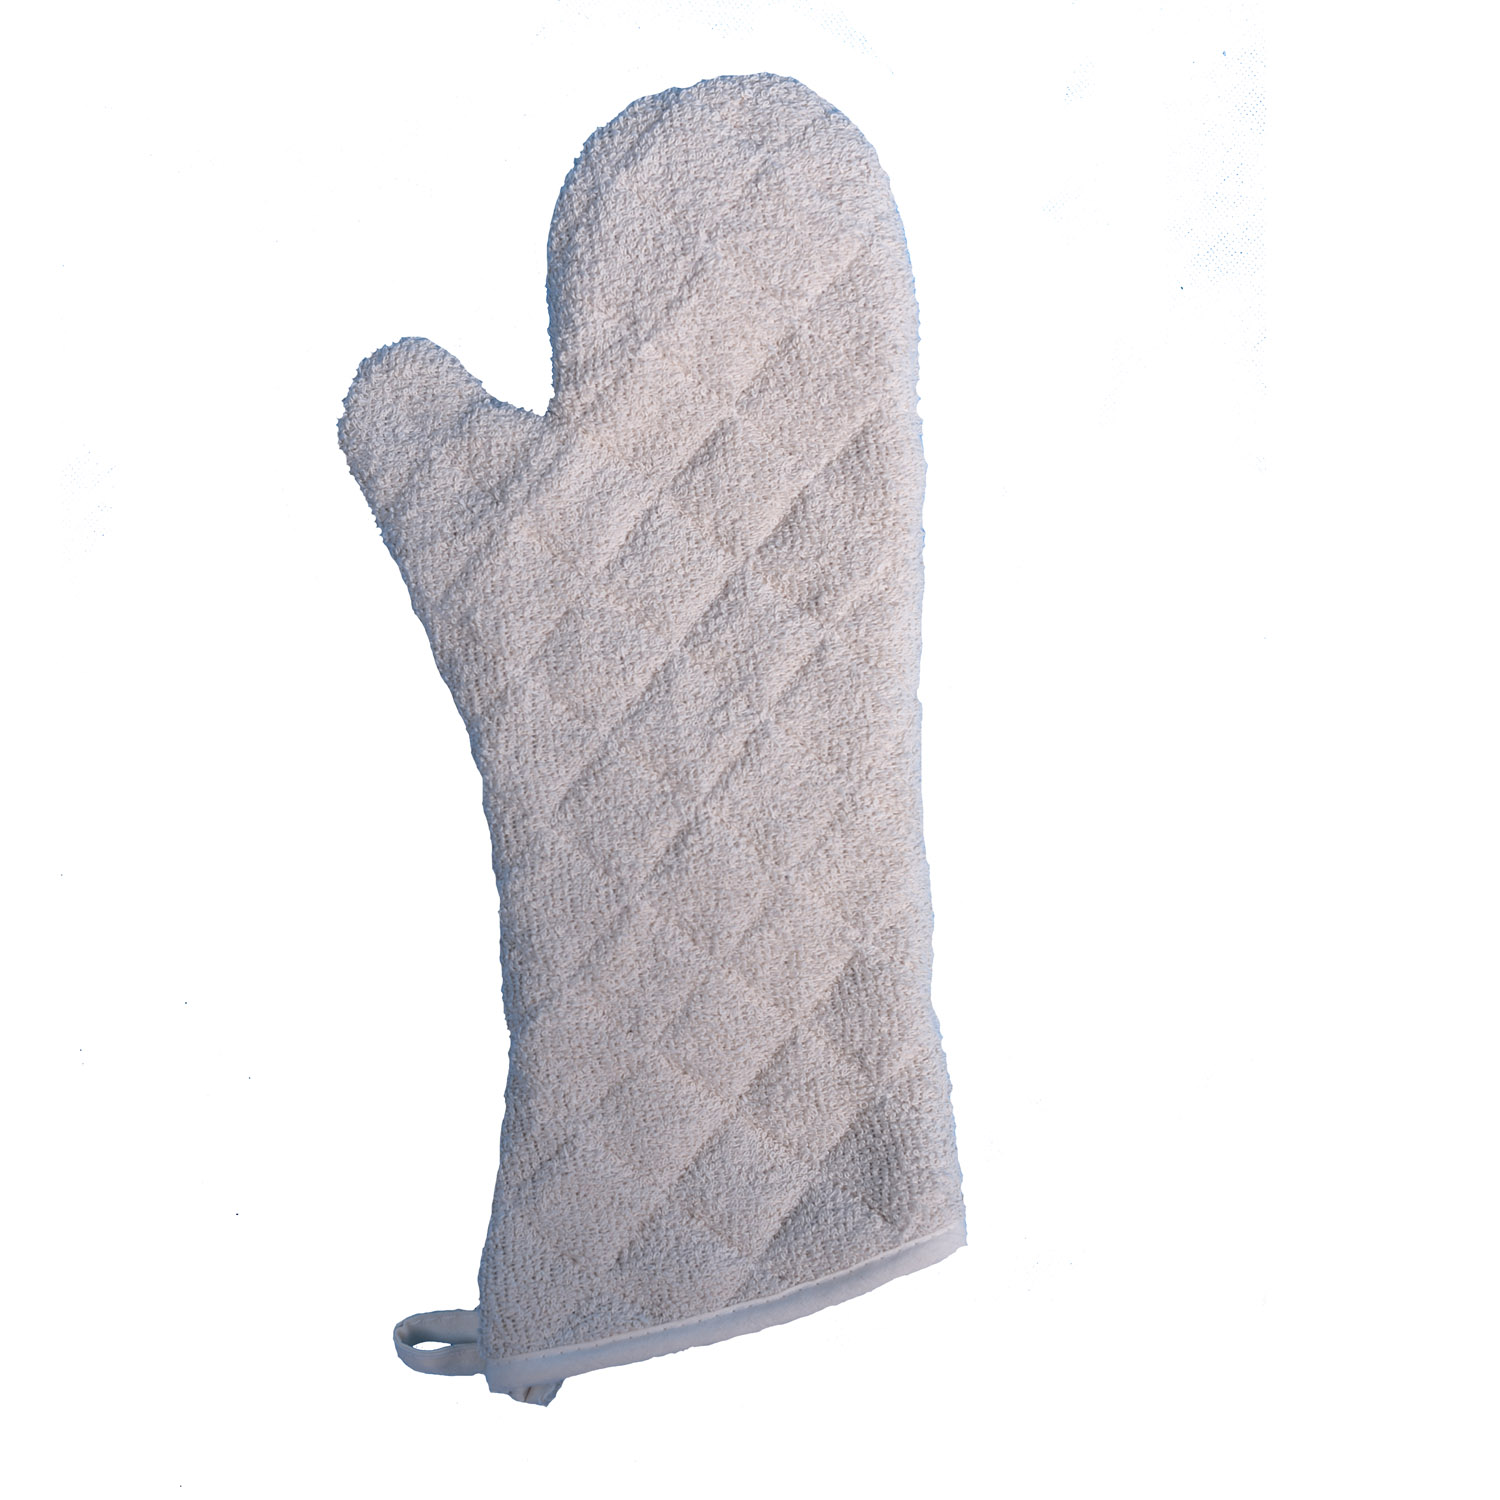 CAC China OMS3-17T Oven Mitt Terry Silicon Lining 17"